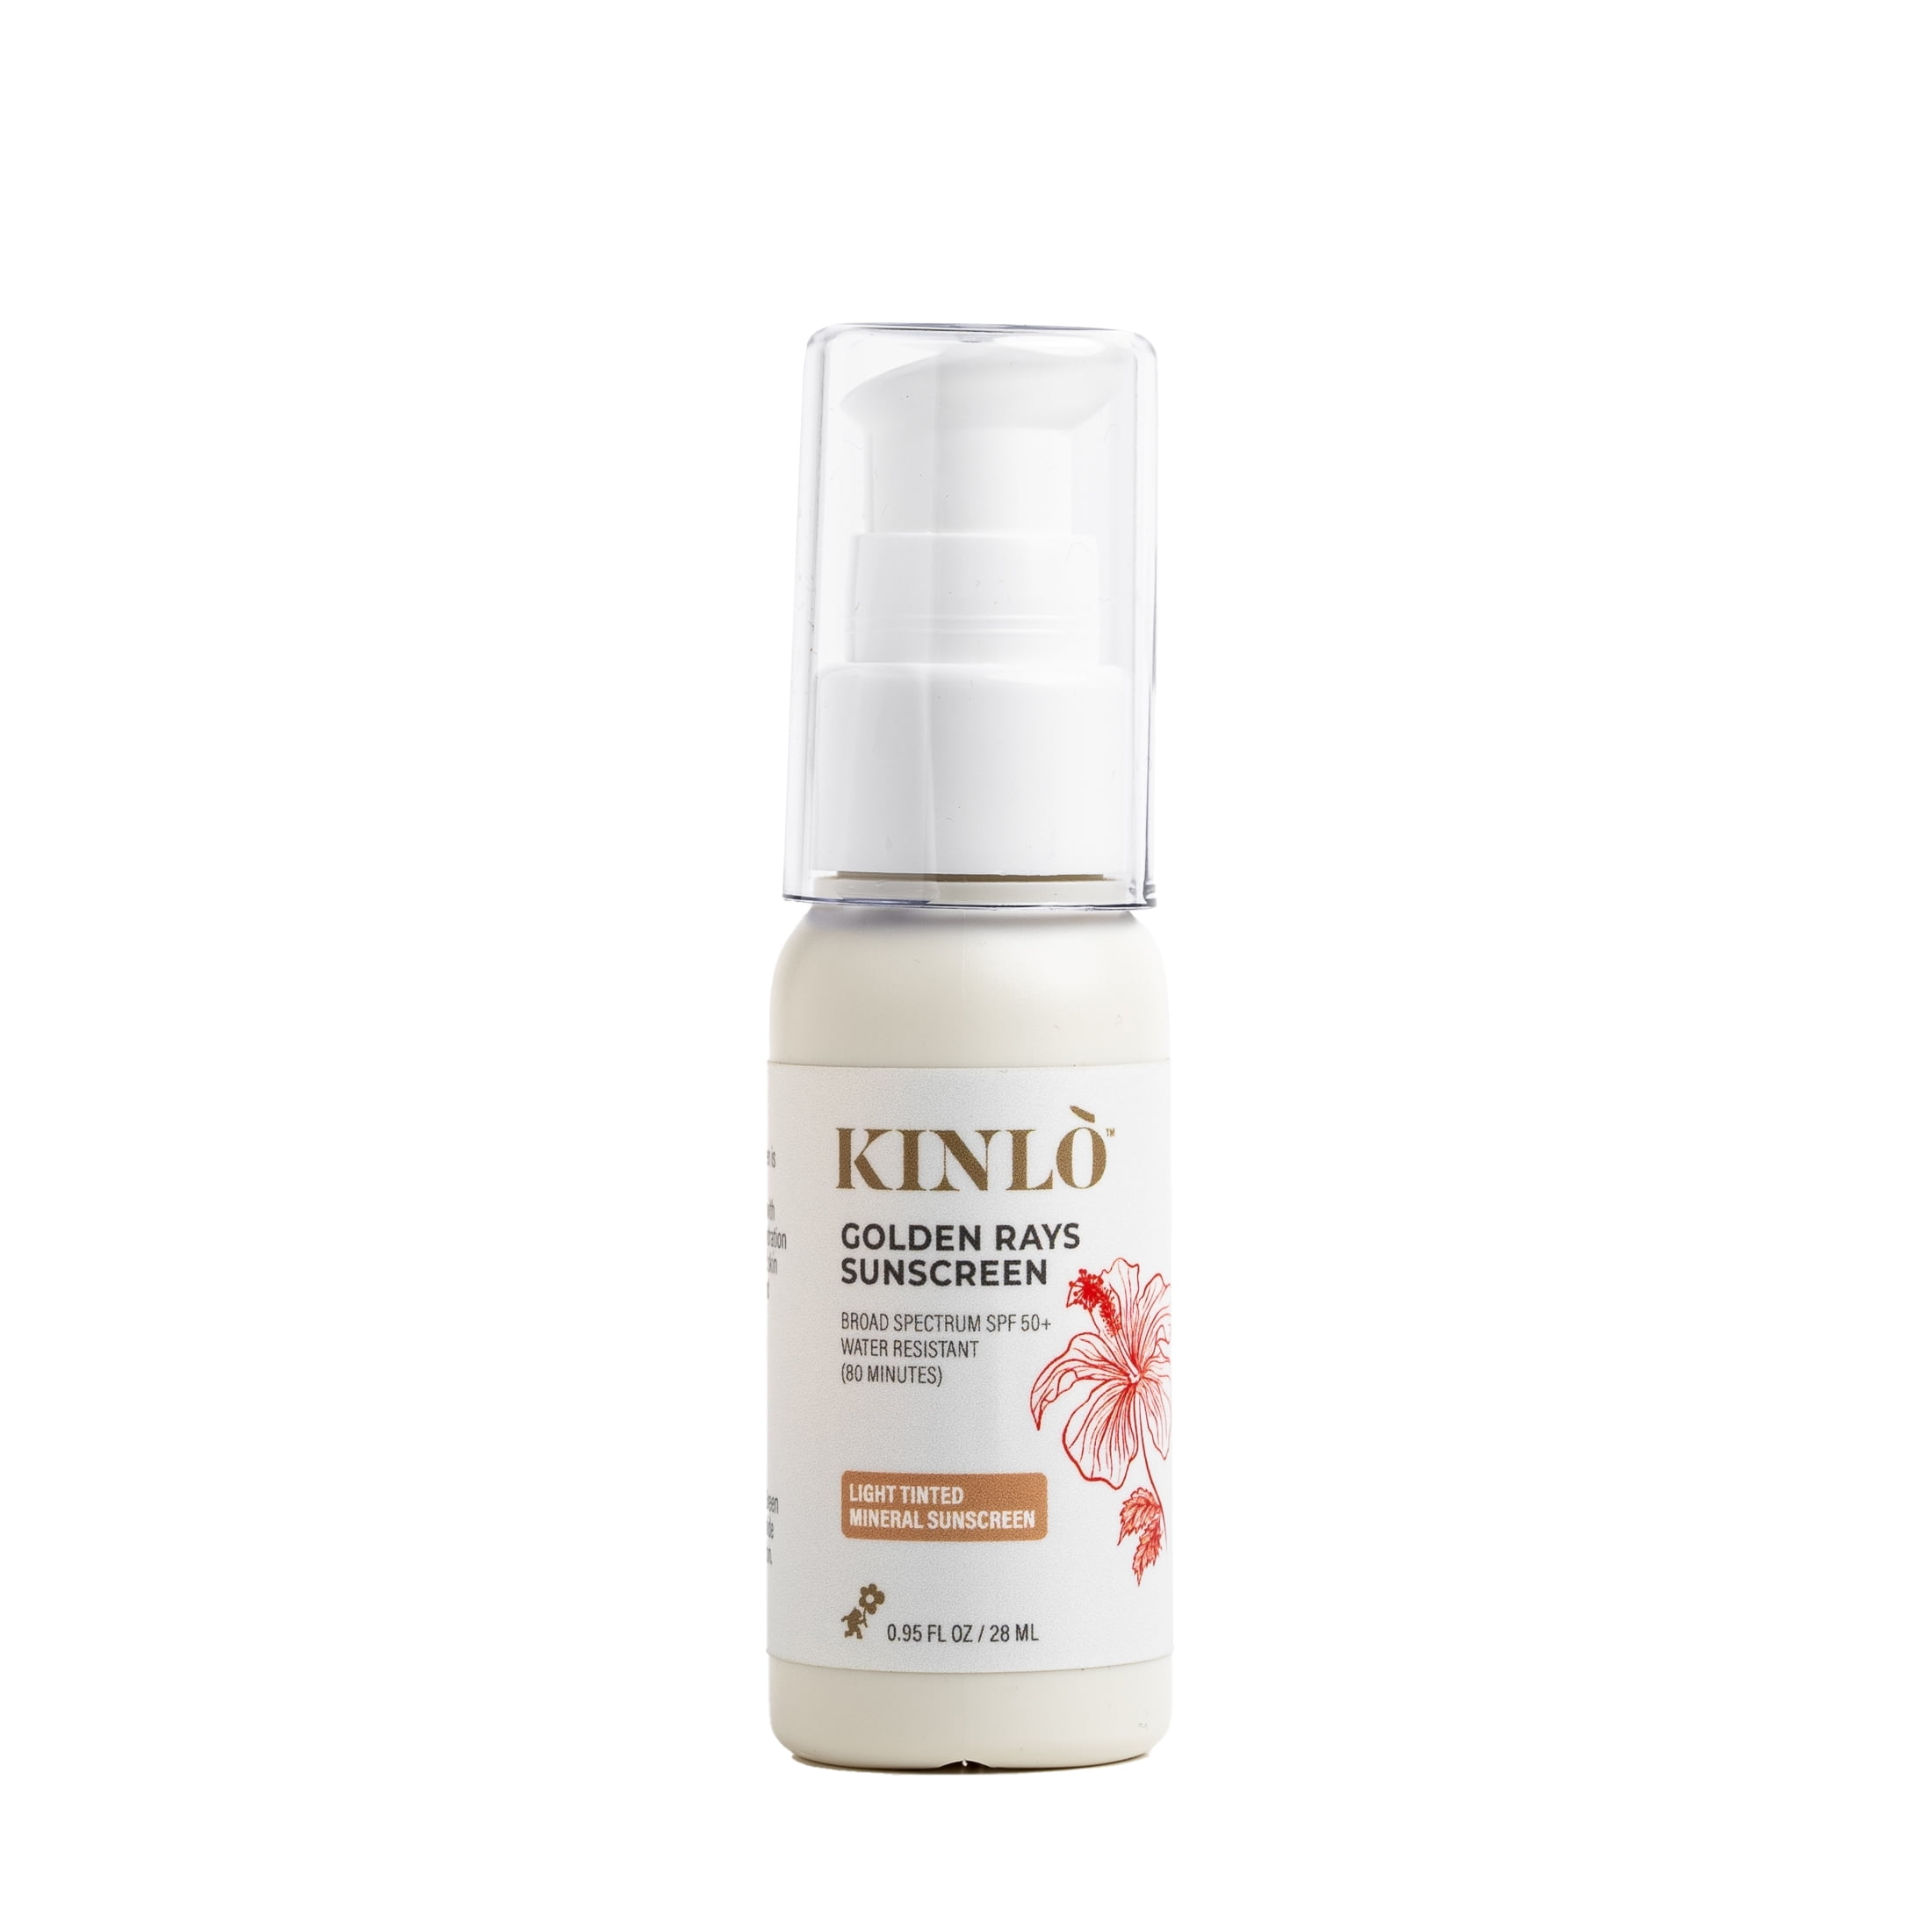 KINLO Golden Rays Tinted Sunscreen SPF 50, Active Mineral Sunscreen, Reef Safe, Water Resistant Up to 80 min, Shade Light 0.95 fl oz